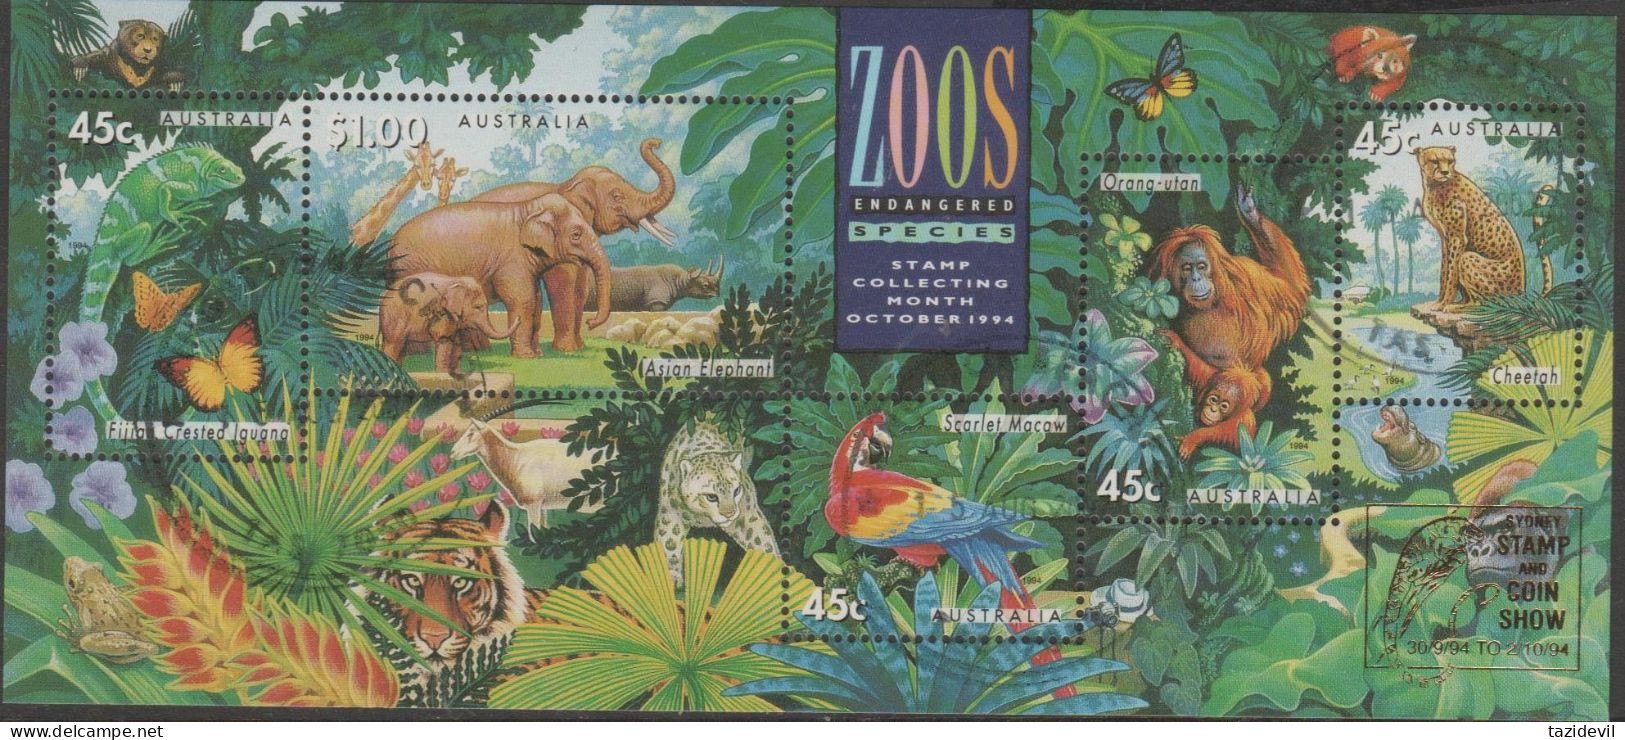 AUSTRALIA - USED - 1994 $2.80 Zoo's Souvenir Sheet Overprinted "Sydney Stamp And Coin Show" - Used Stamps